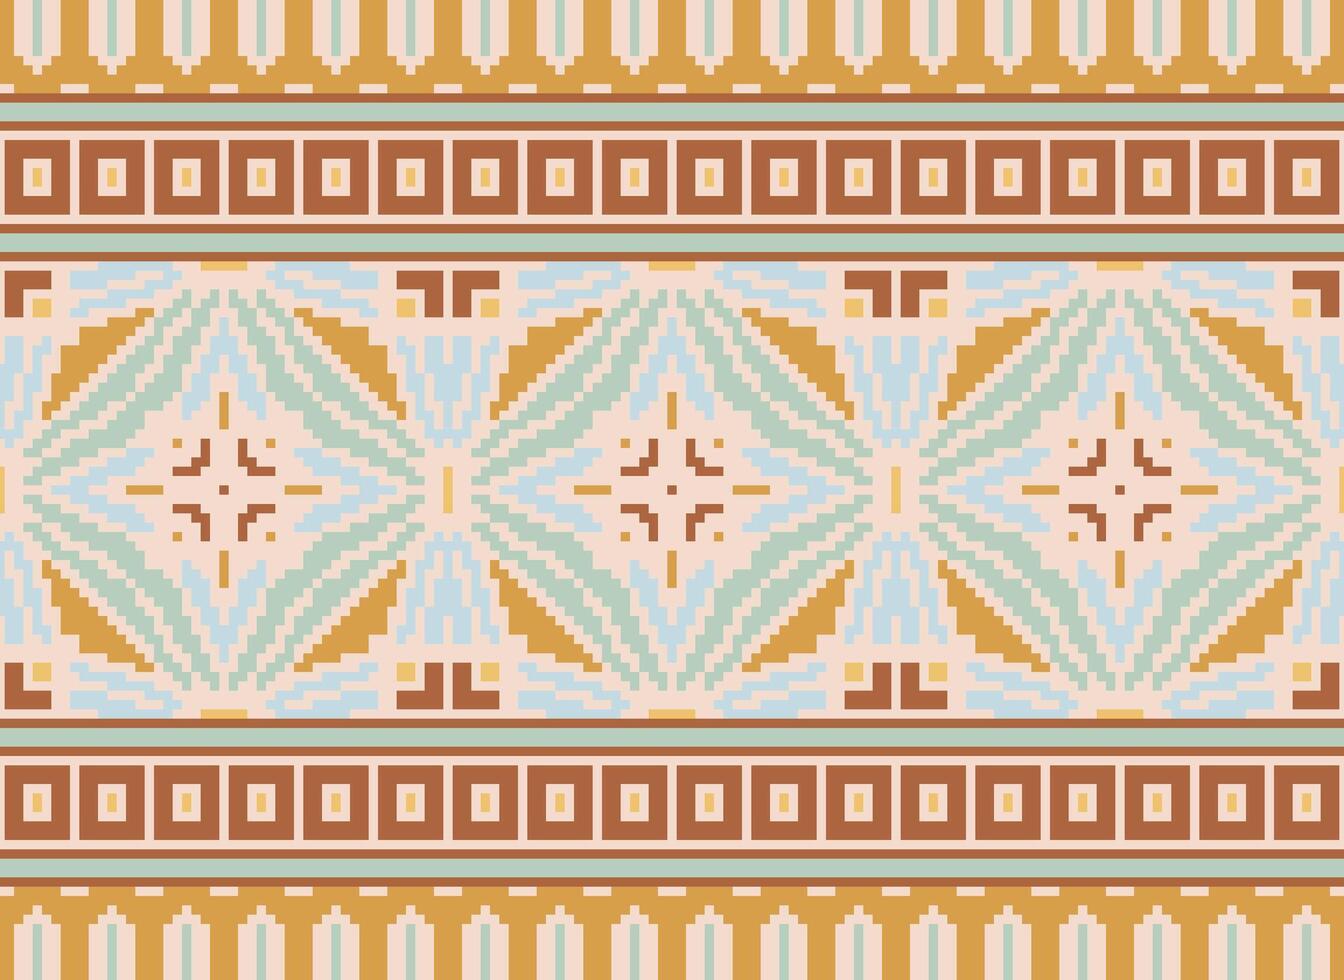 Pixel Cross Stitch Embroidery. Ethnic Patterns. Native Style. Traditional Design for texture, textile, fabric, clothing, Knitwear, print. Geometric Pixel Horizontal Seamless Vector. vector